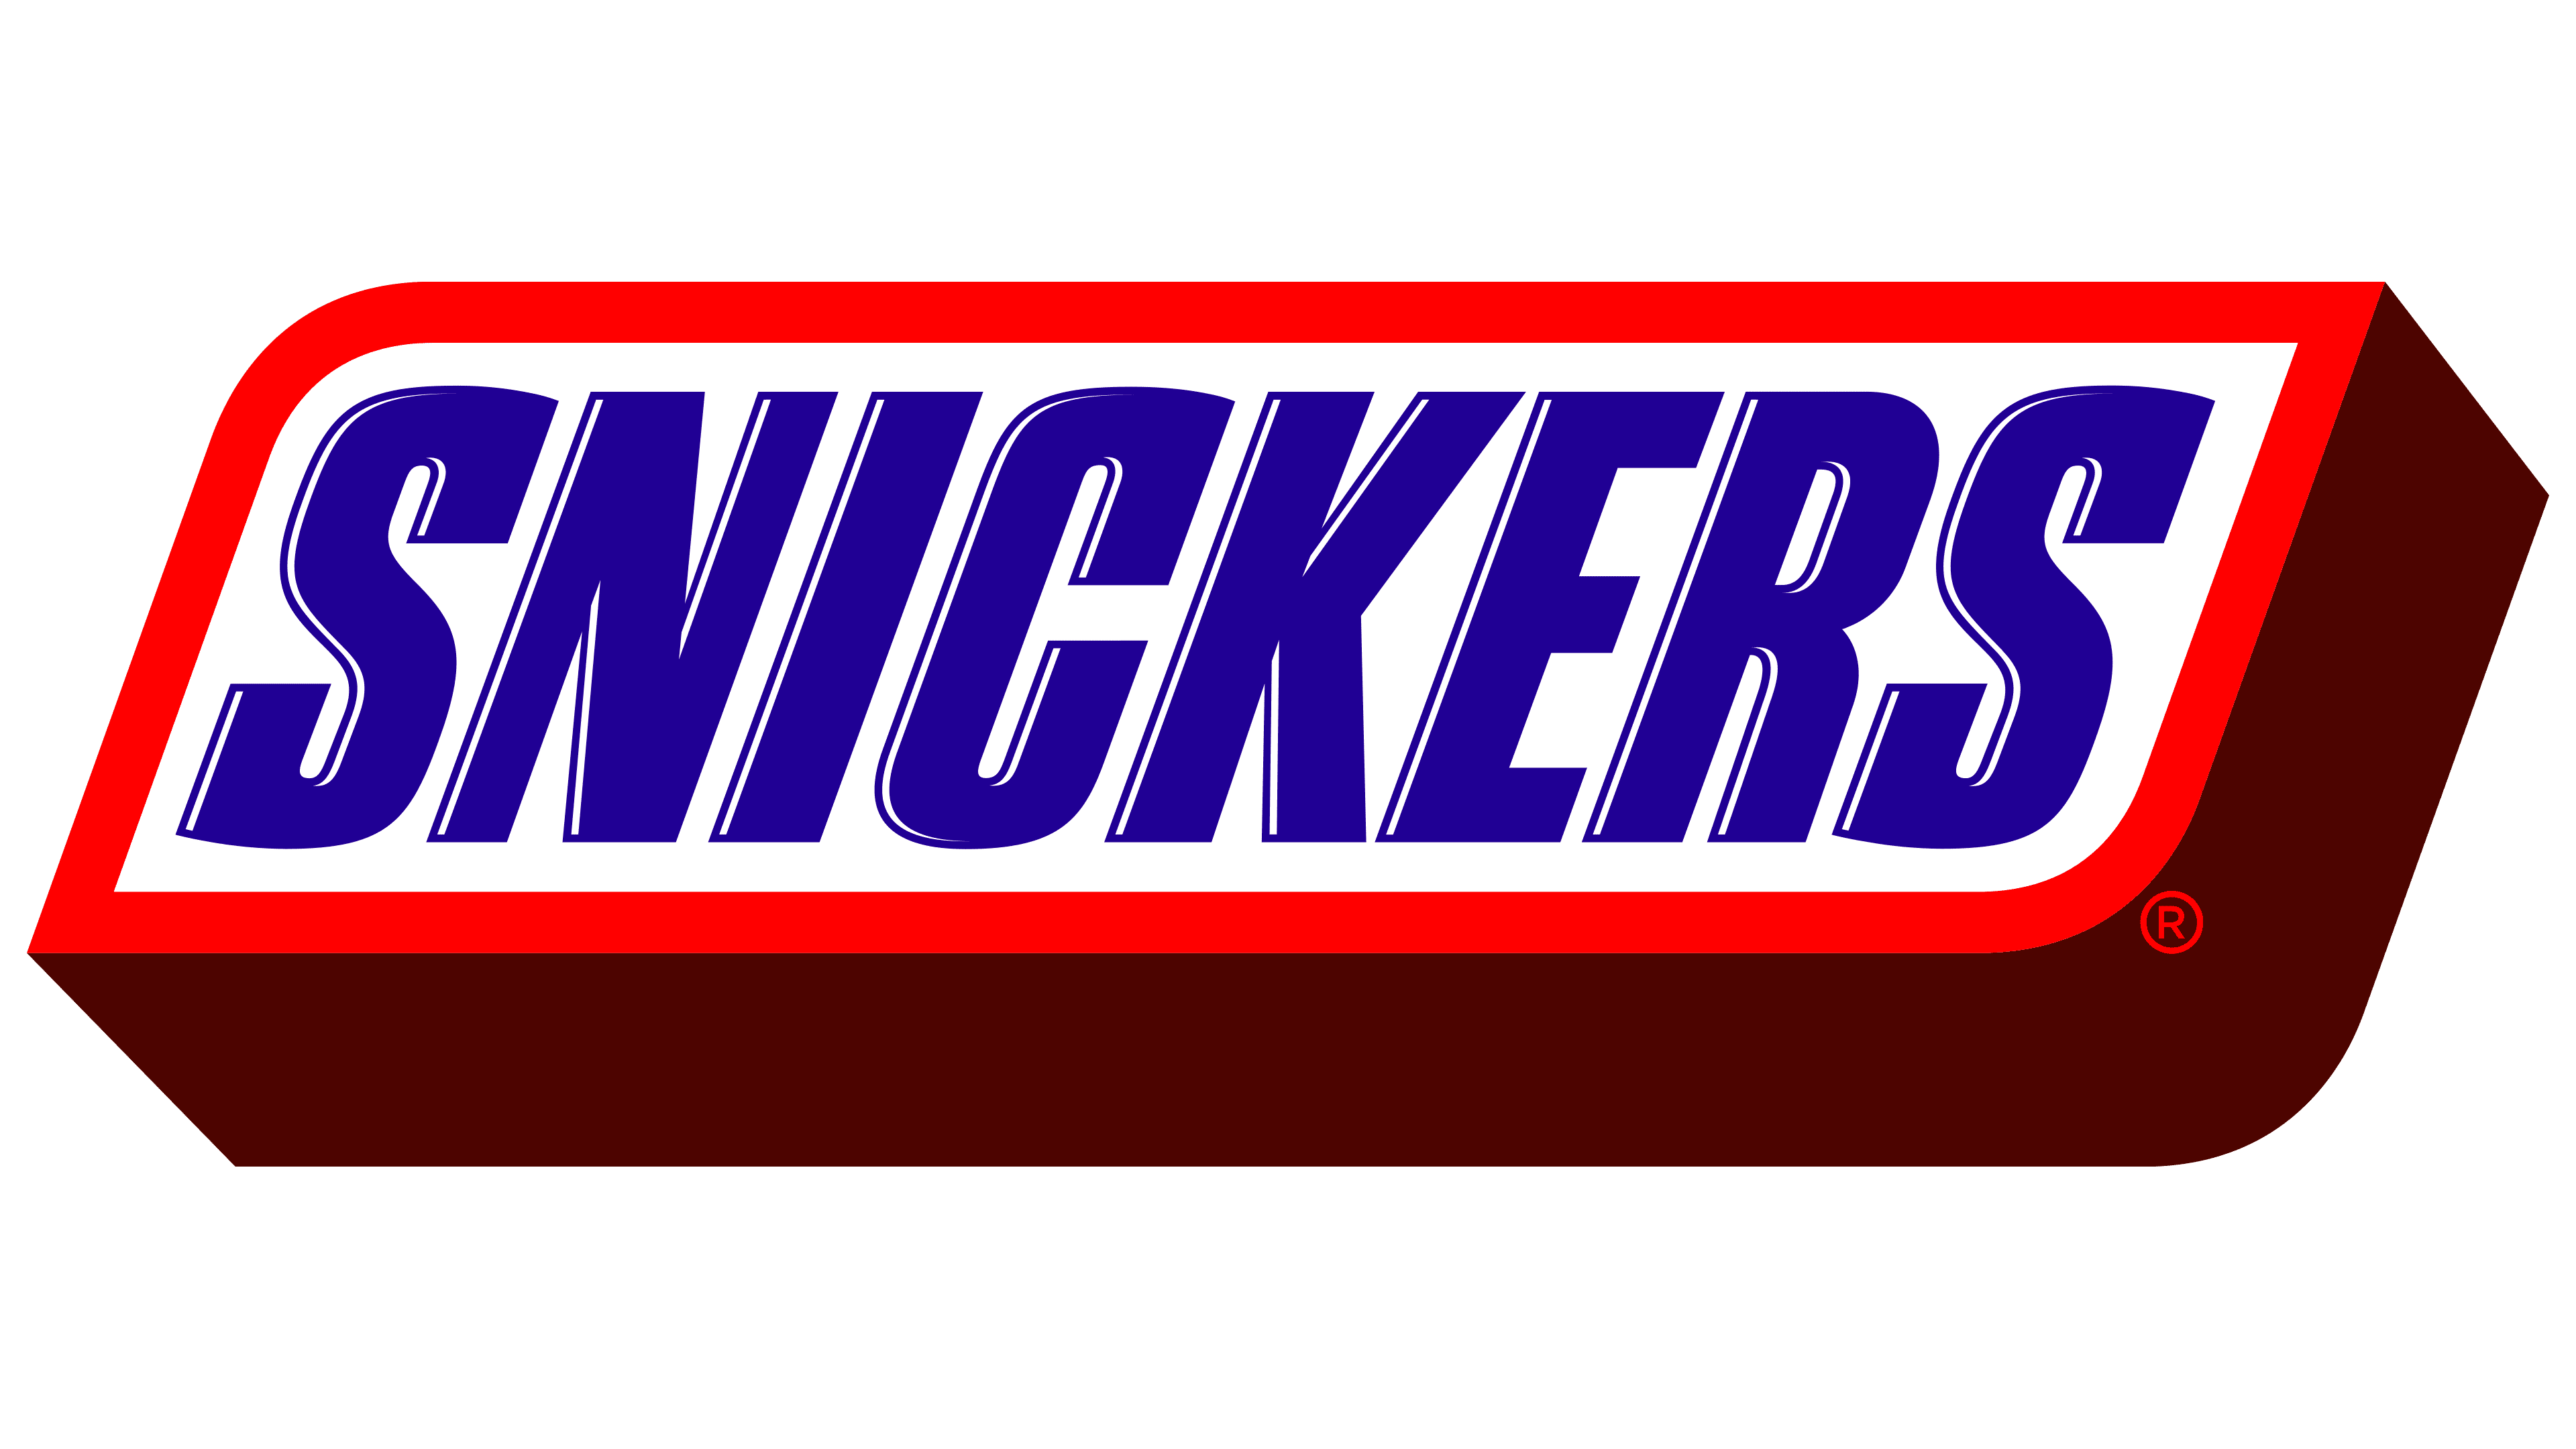 snickers png